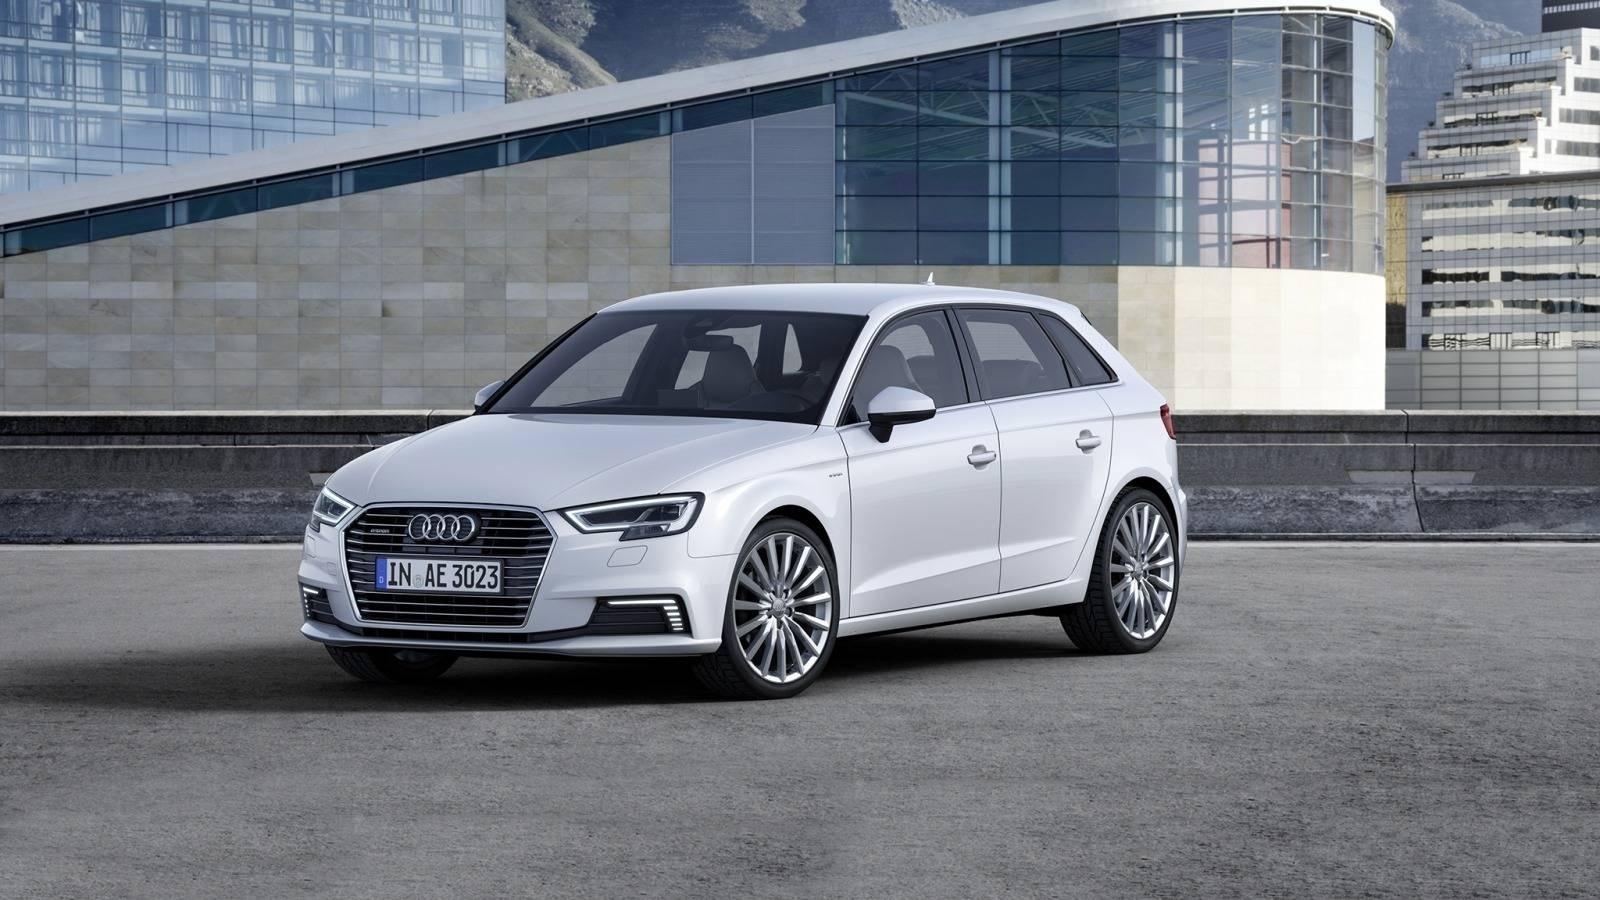 Audi A3 Sportback E Tron Overview and Price